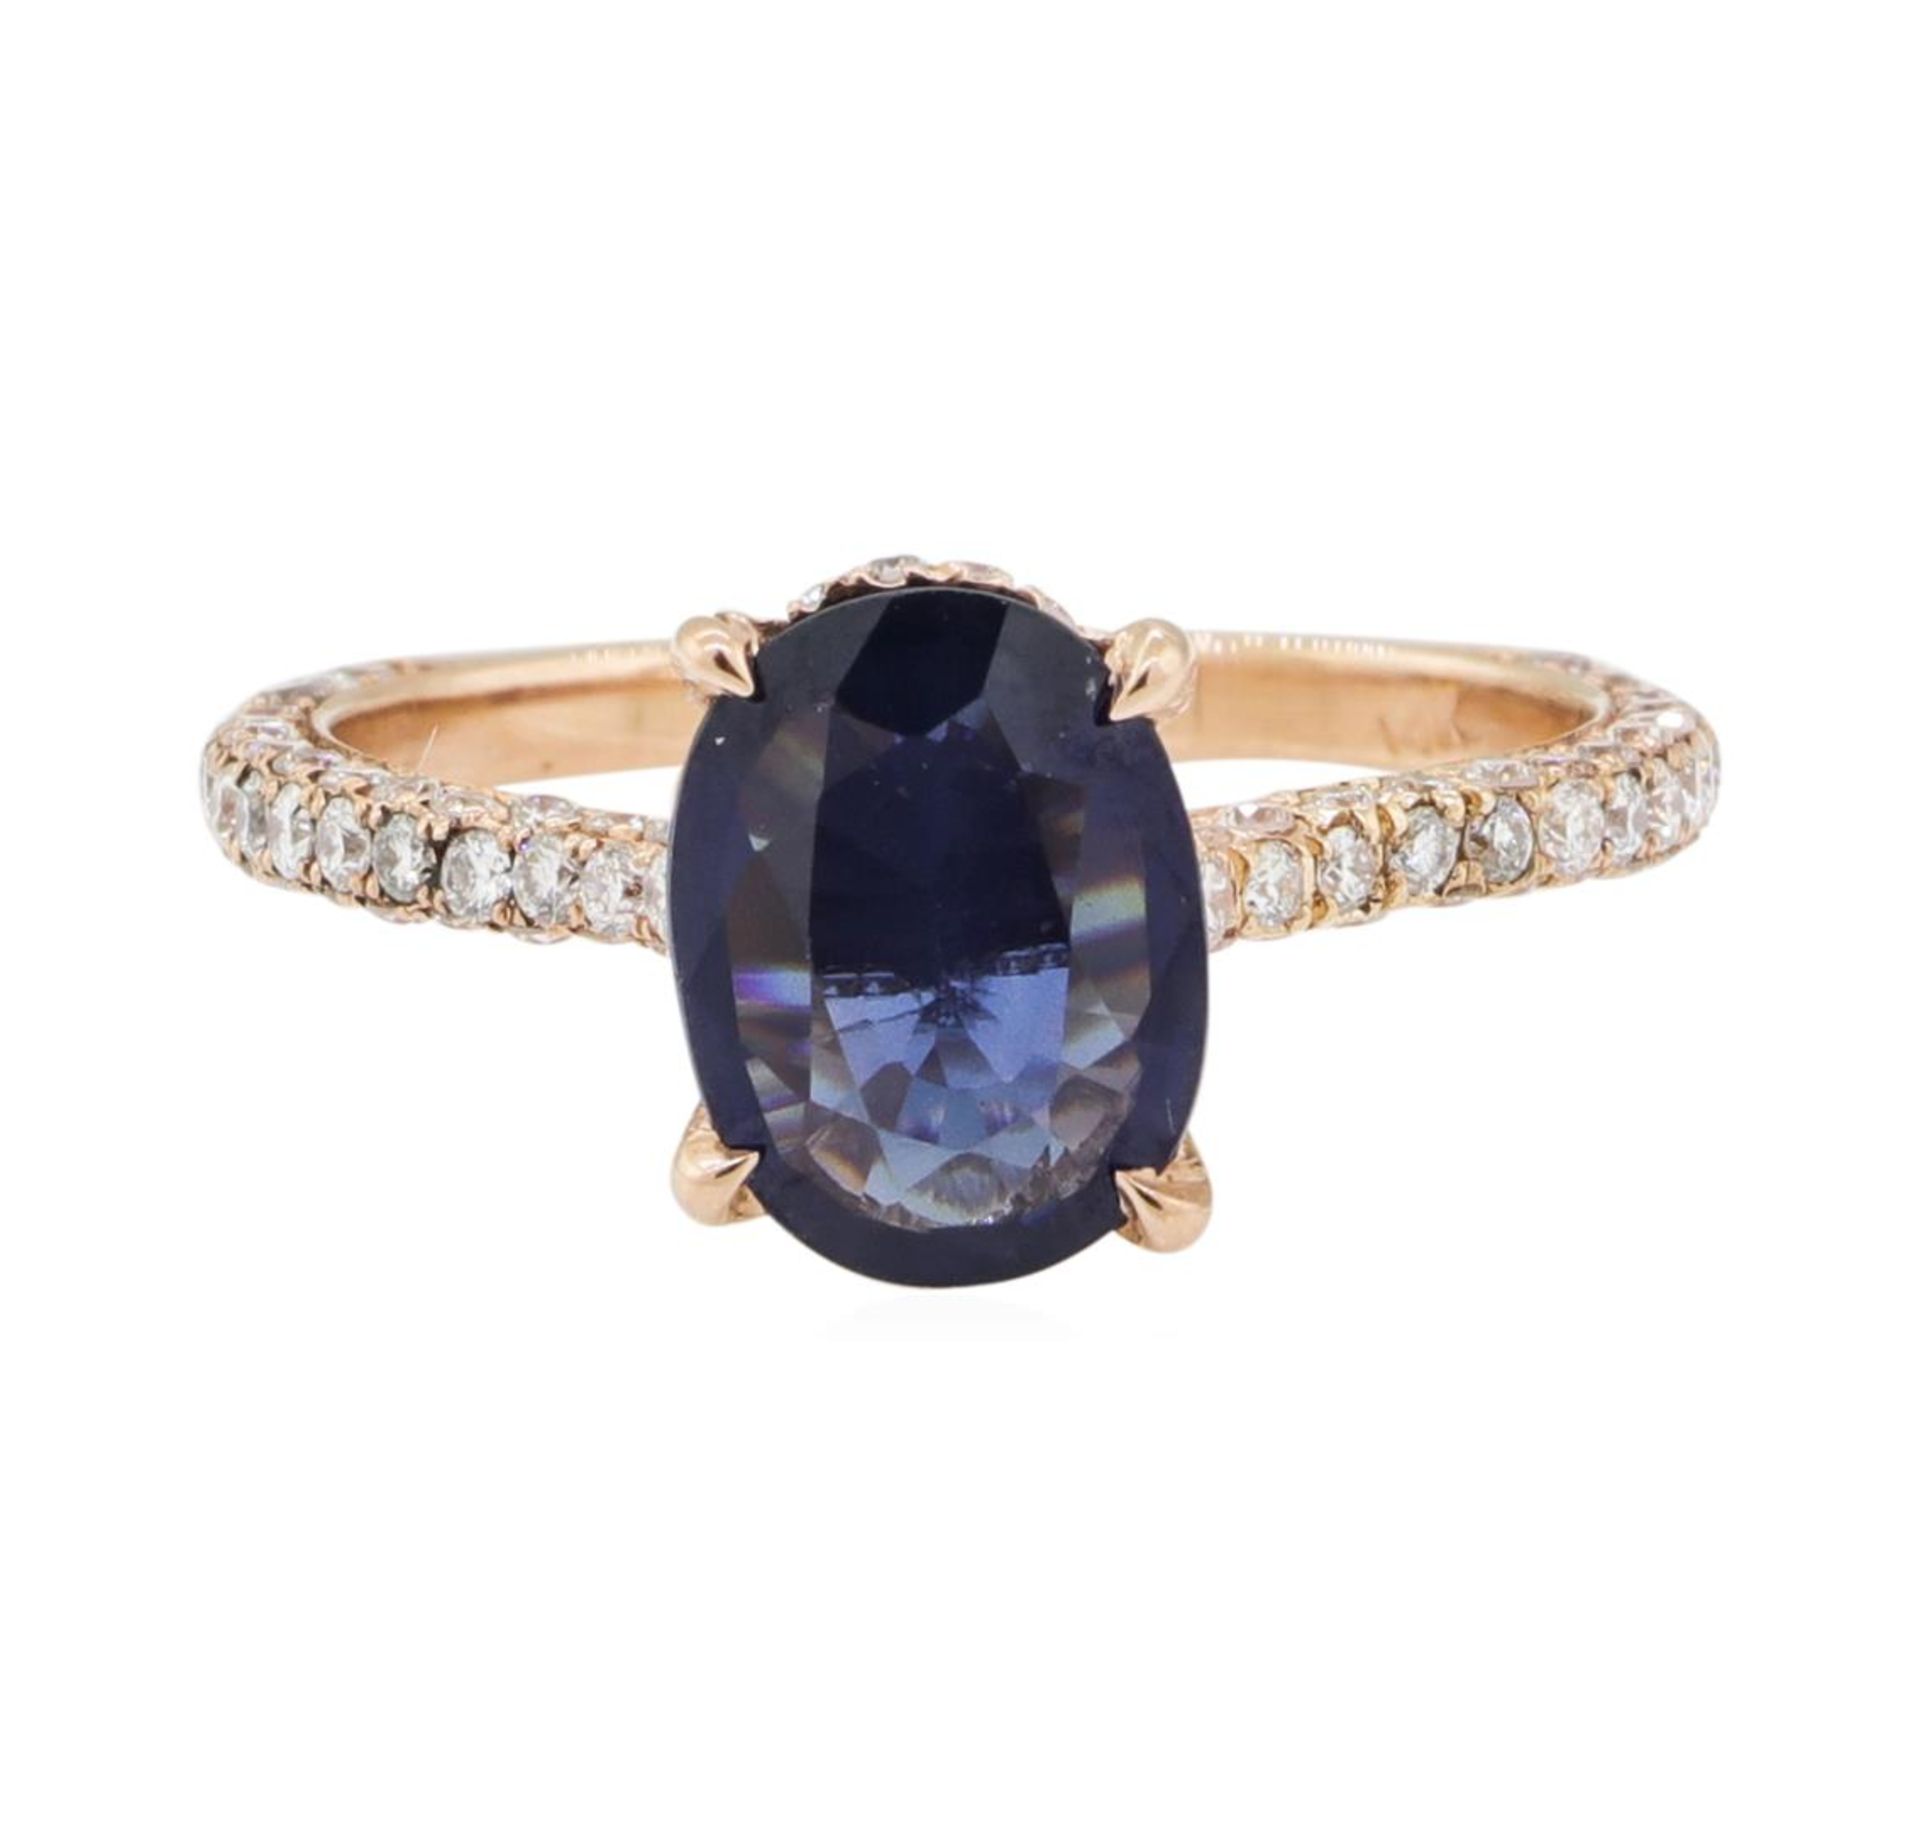 2.15 ctw Sapphire and Diamond Ring - 14KT Rose Gold - Image 2 of 5